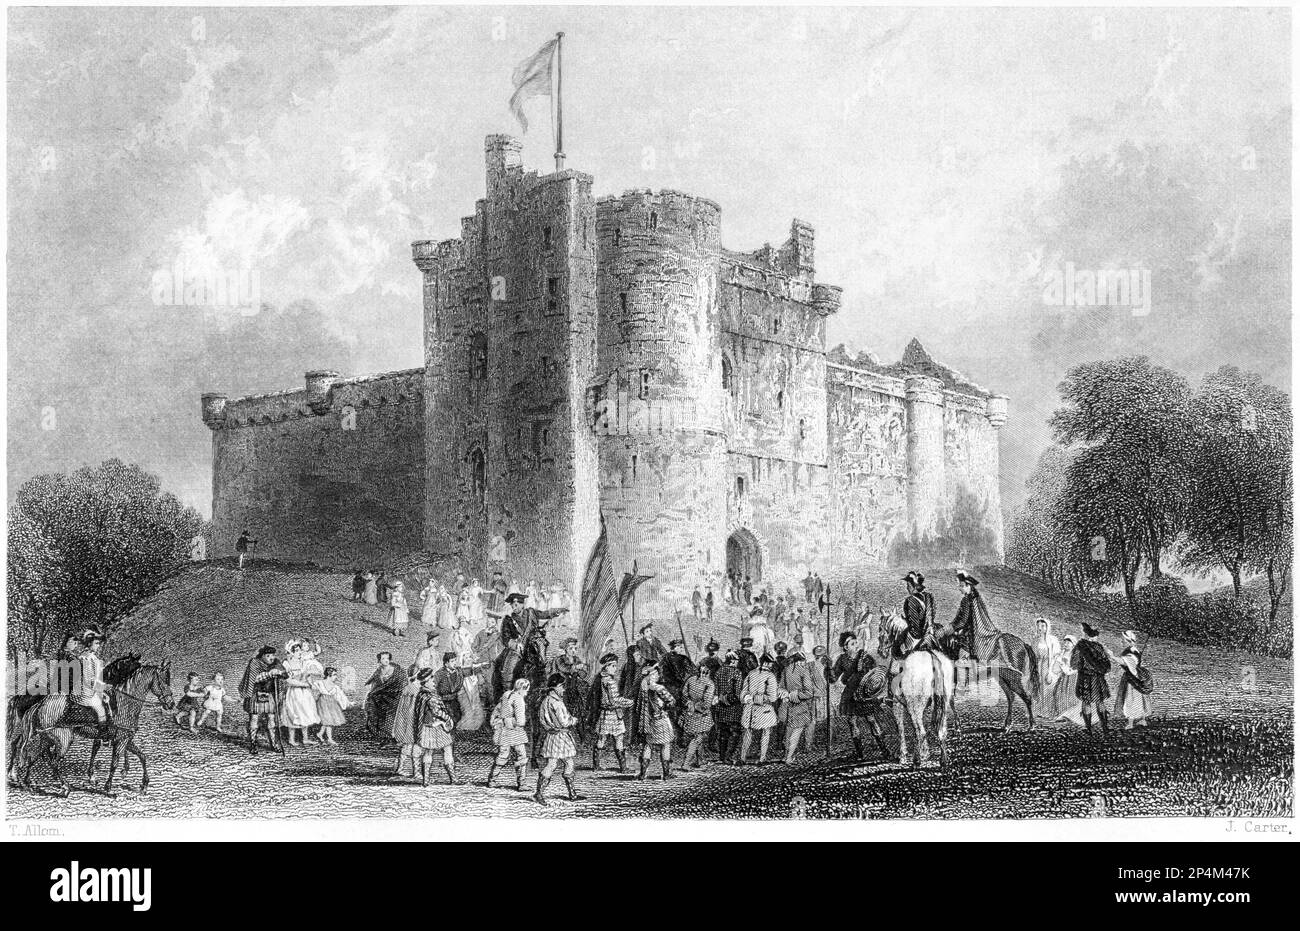 An engraving of the Castle of Doune (Prince Charles Stuart. Disposal of his Prisoners after tha Battle of Falkirk AD 1746) from a book of 1840. Stock Photo